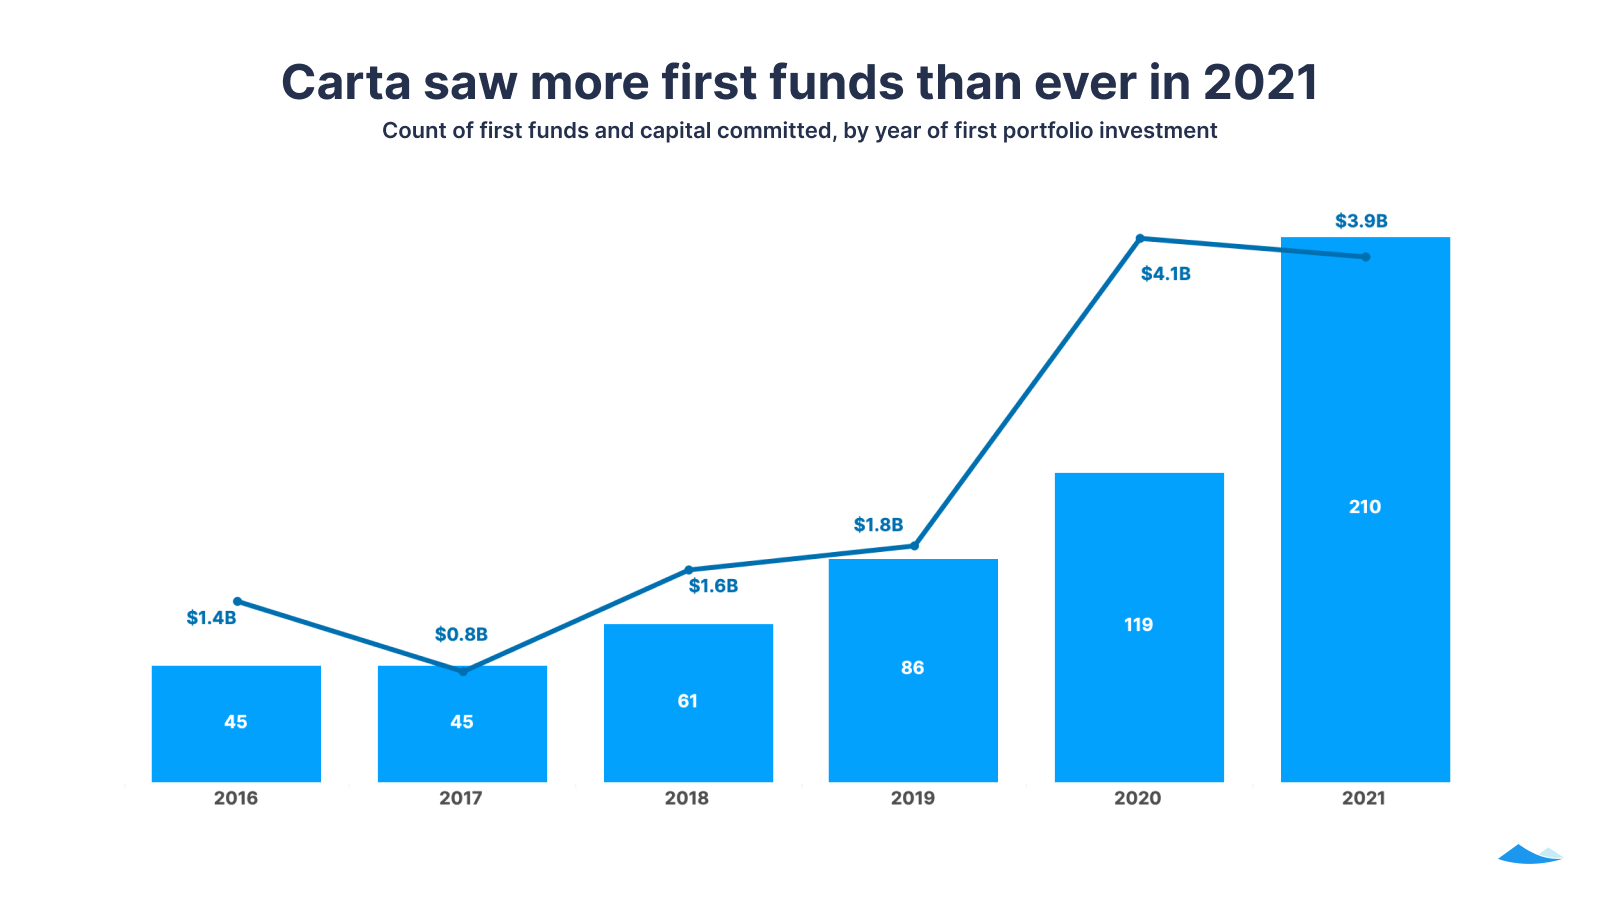 Carta saw more first funds than ever in 2021: Count of first funds and capital committed, by year of first portfolio investment 2016-21